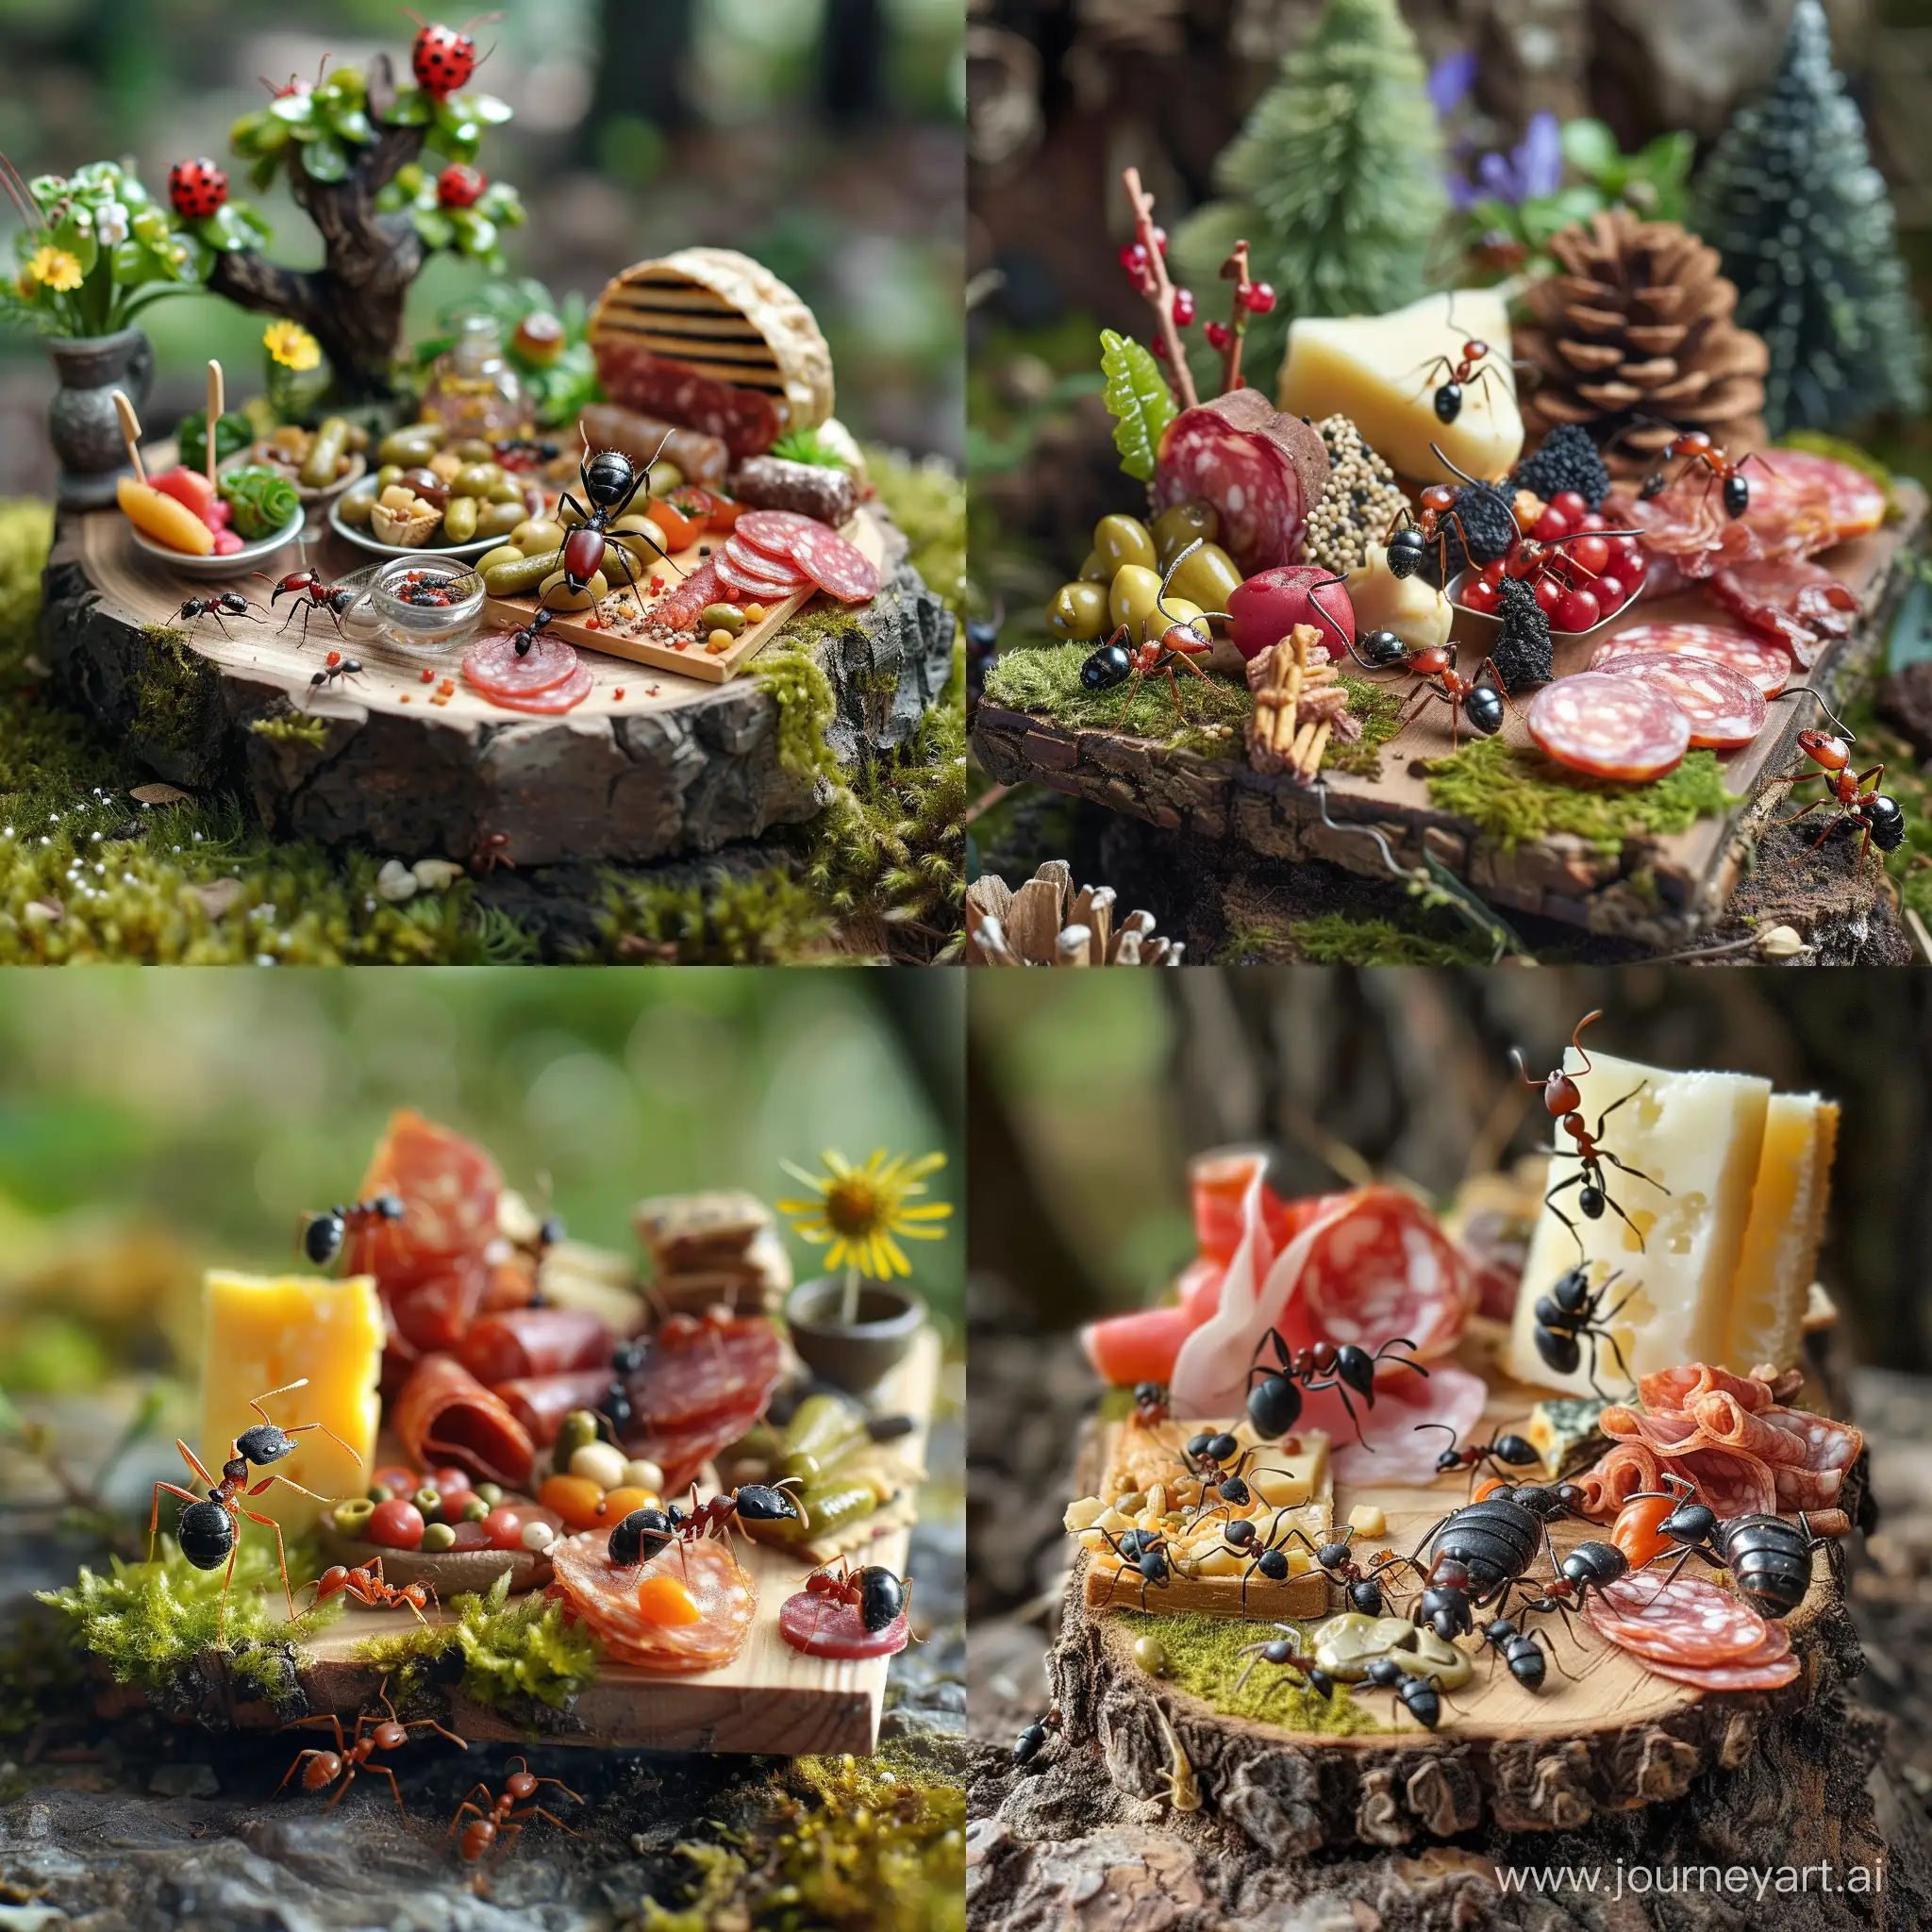 Showcase a miniature charcuterie board set up for a tiny picnic, with ants or other small creatures enjoying the spread.